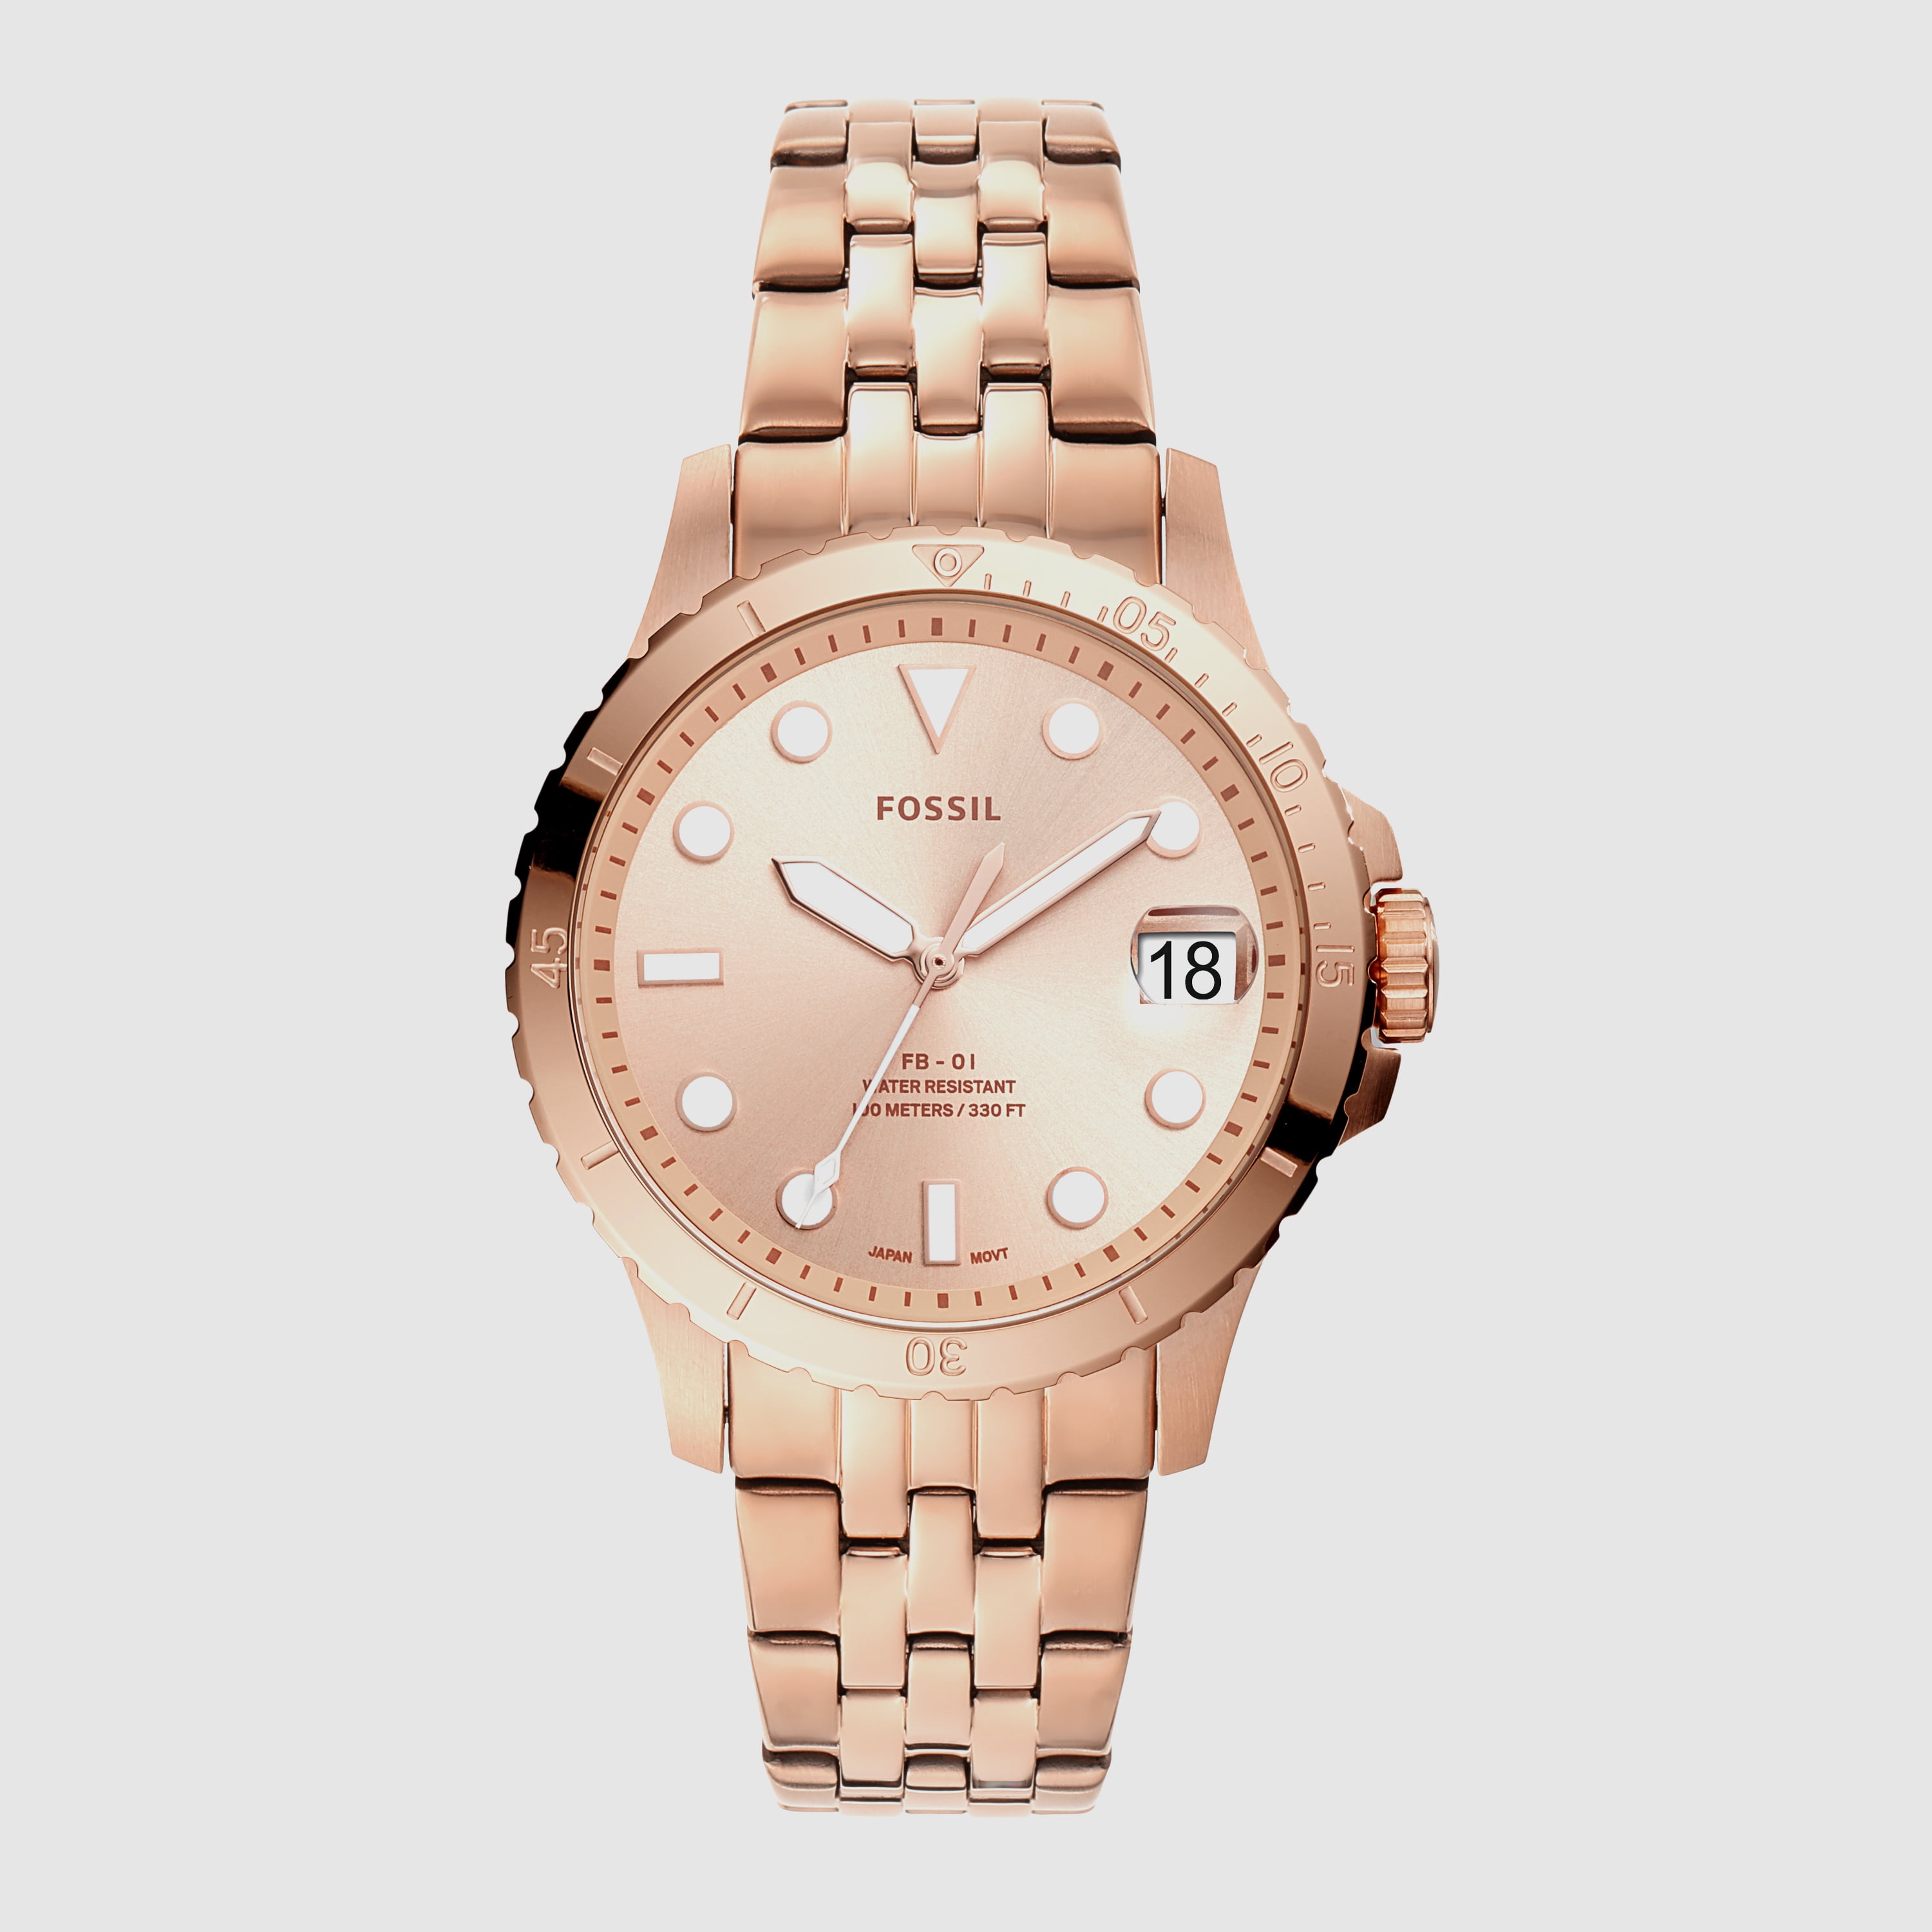 Fossil Women's FB-01 Three-Hand Date Rose Gold-Tone Stainless Steel ...